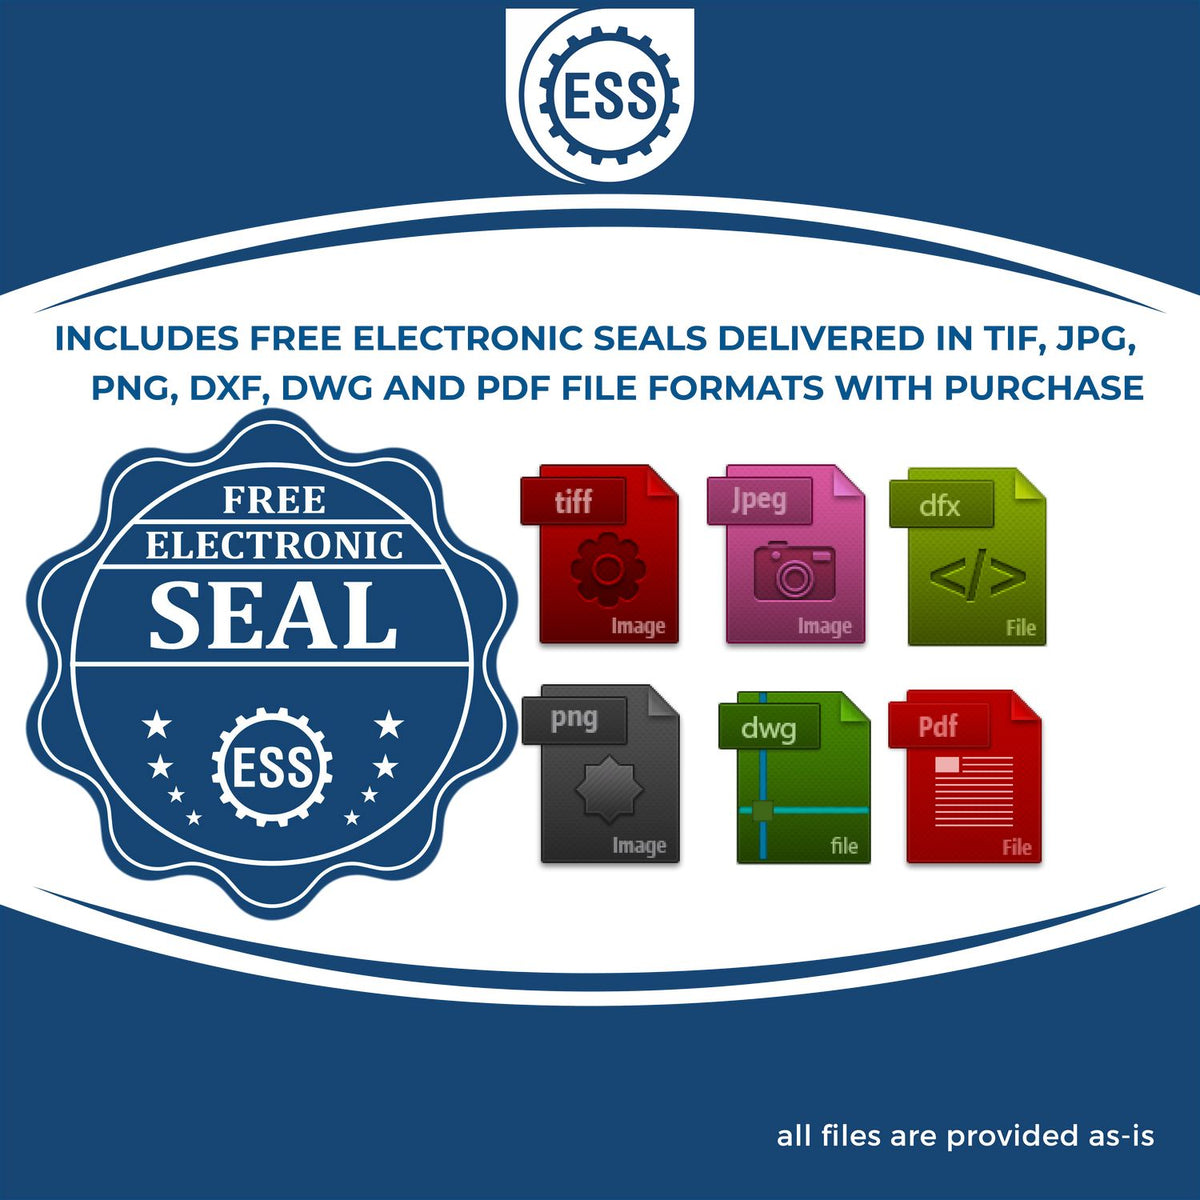 An infographic for the free electronic seal for the Gift Connecticut Engineer Seal illustrating the different file type icons such as DXF, DWG, TIF, JPG and PNG.